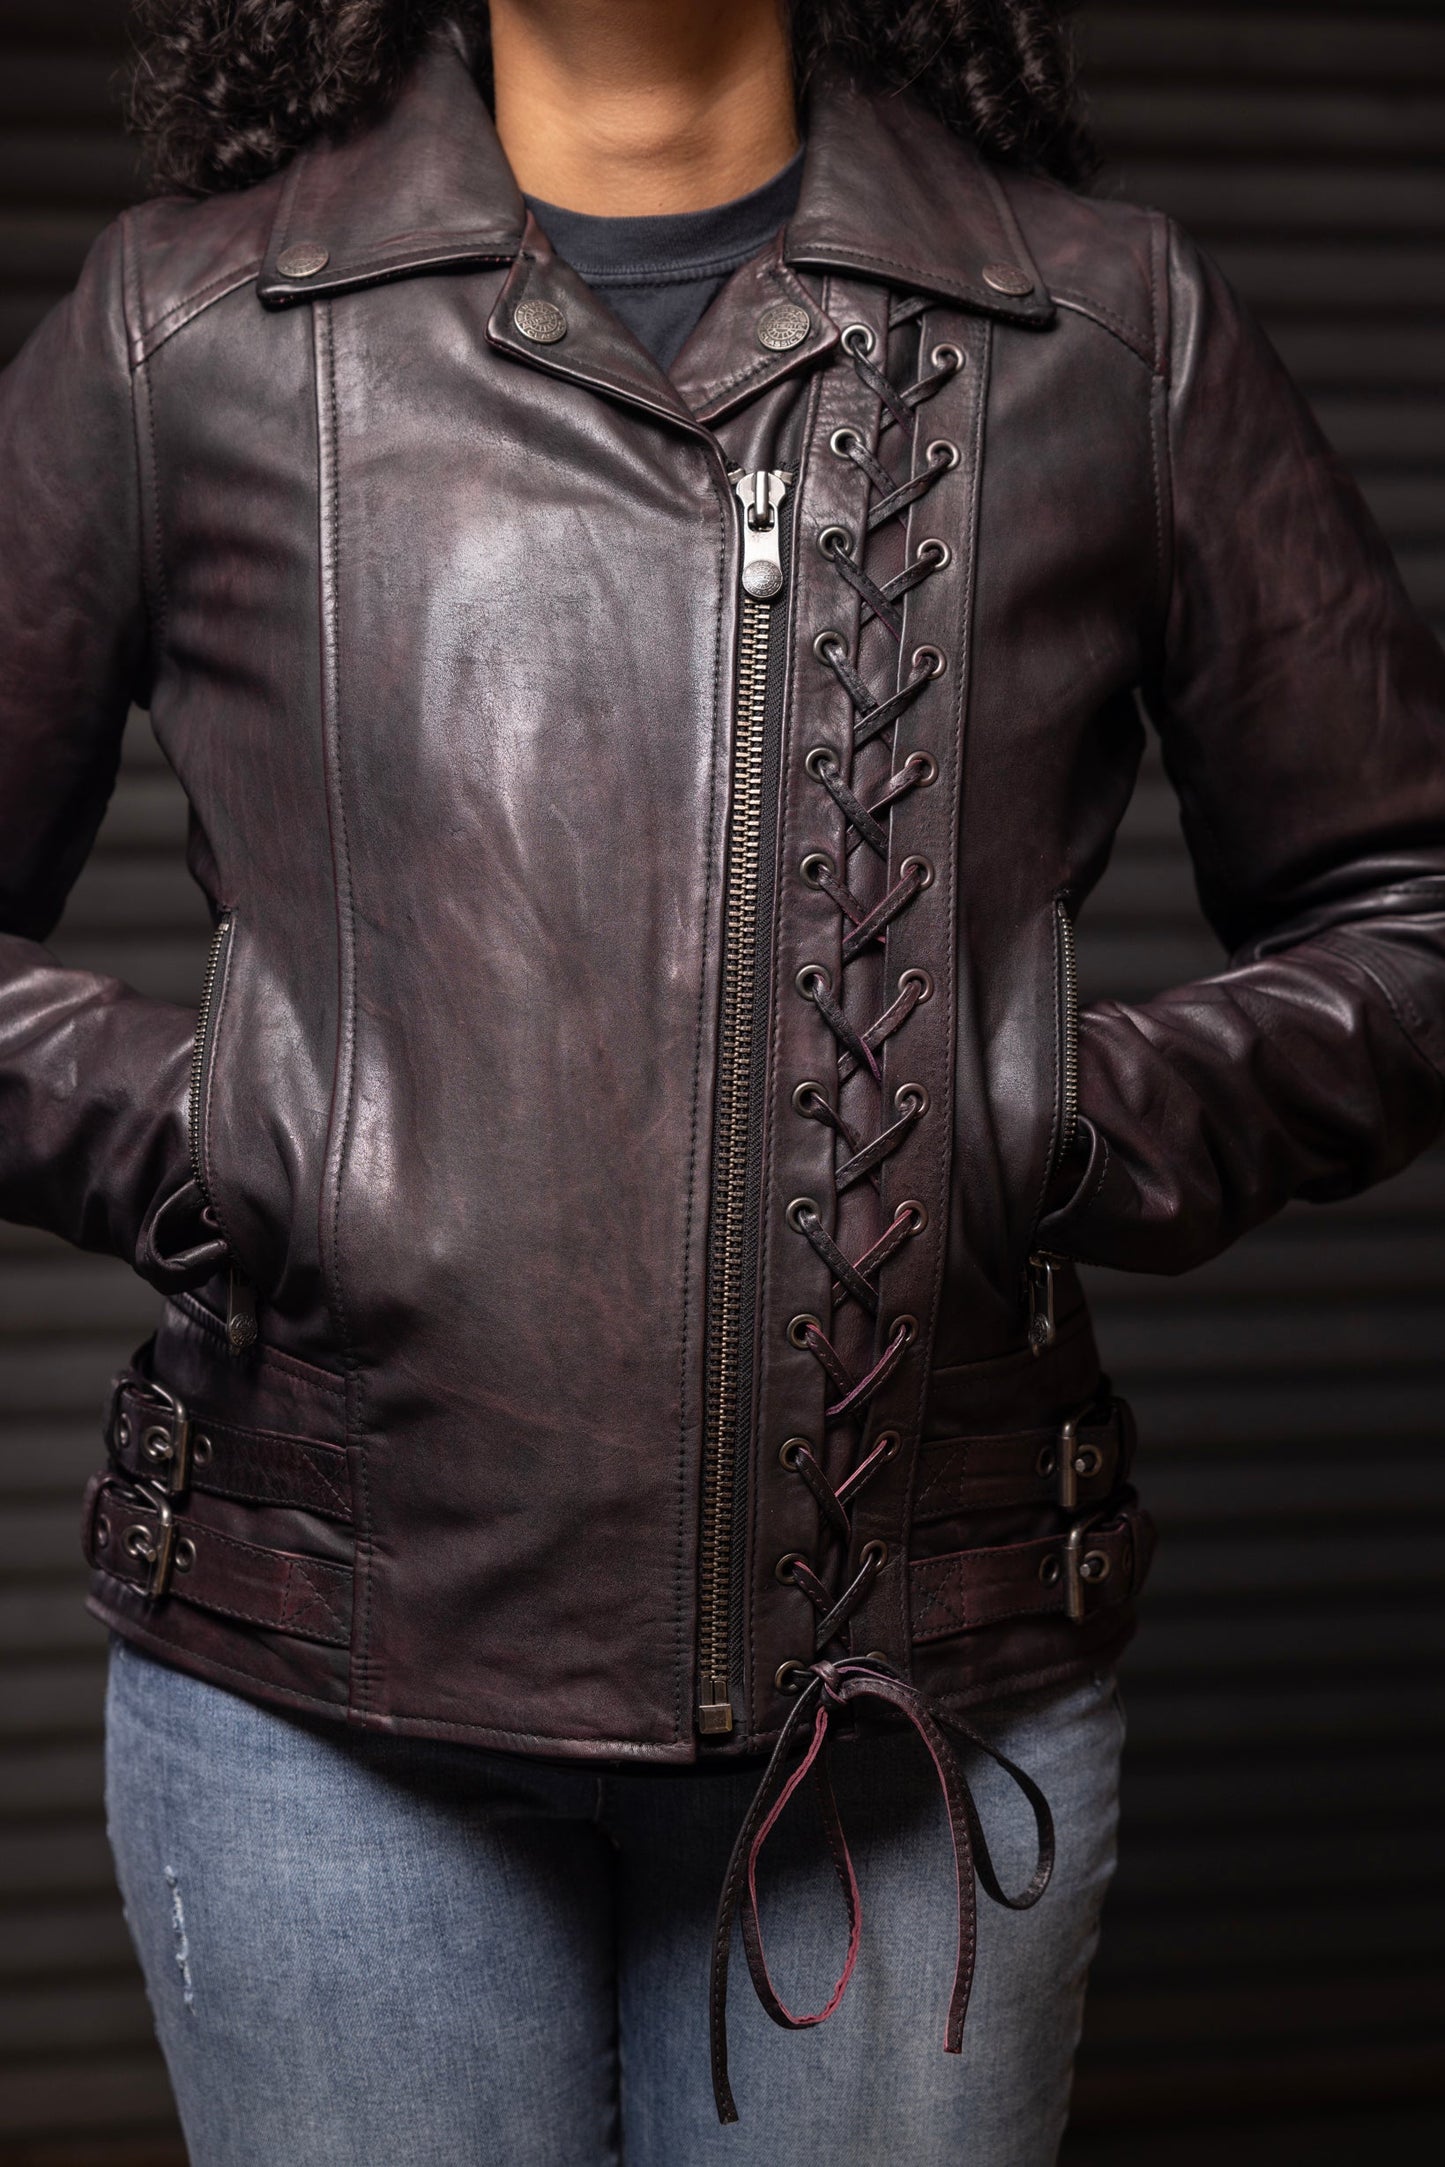 Wildside - Women's Motorcycle Leather Jacket Women's Leather Jacket First Manufacturing Company   